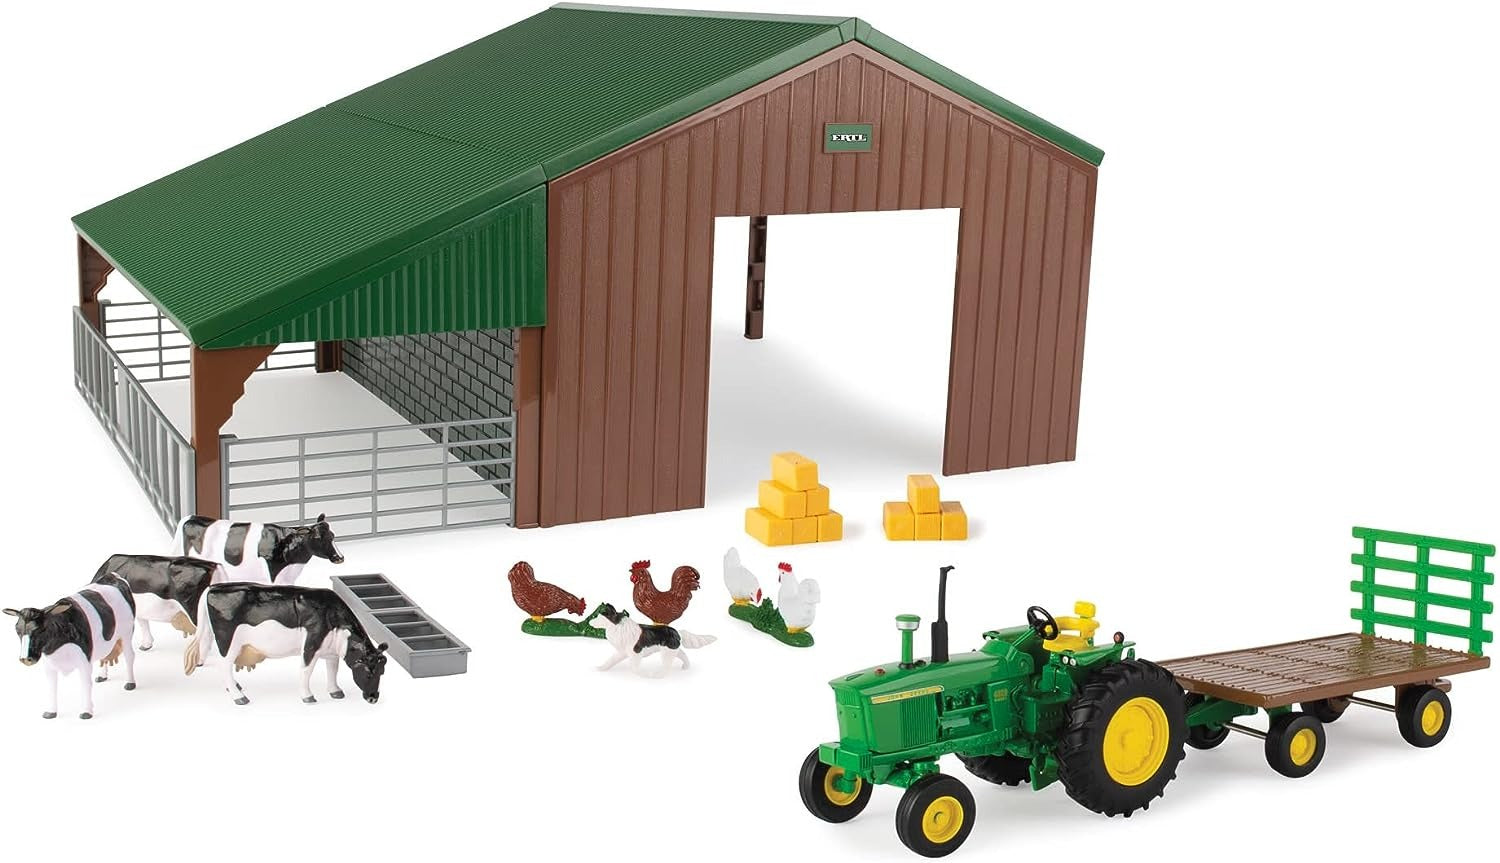 1:32 JOHN DEERE 4020 TRACTOR AND DUAL PURPOSE SHED PLAYSET